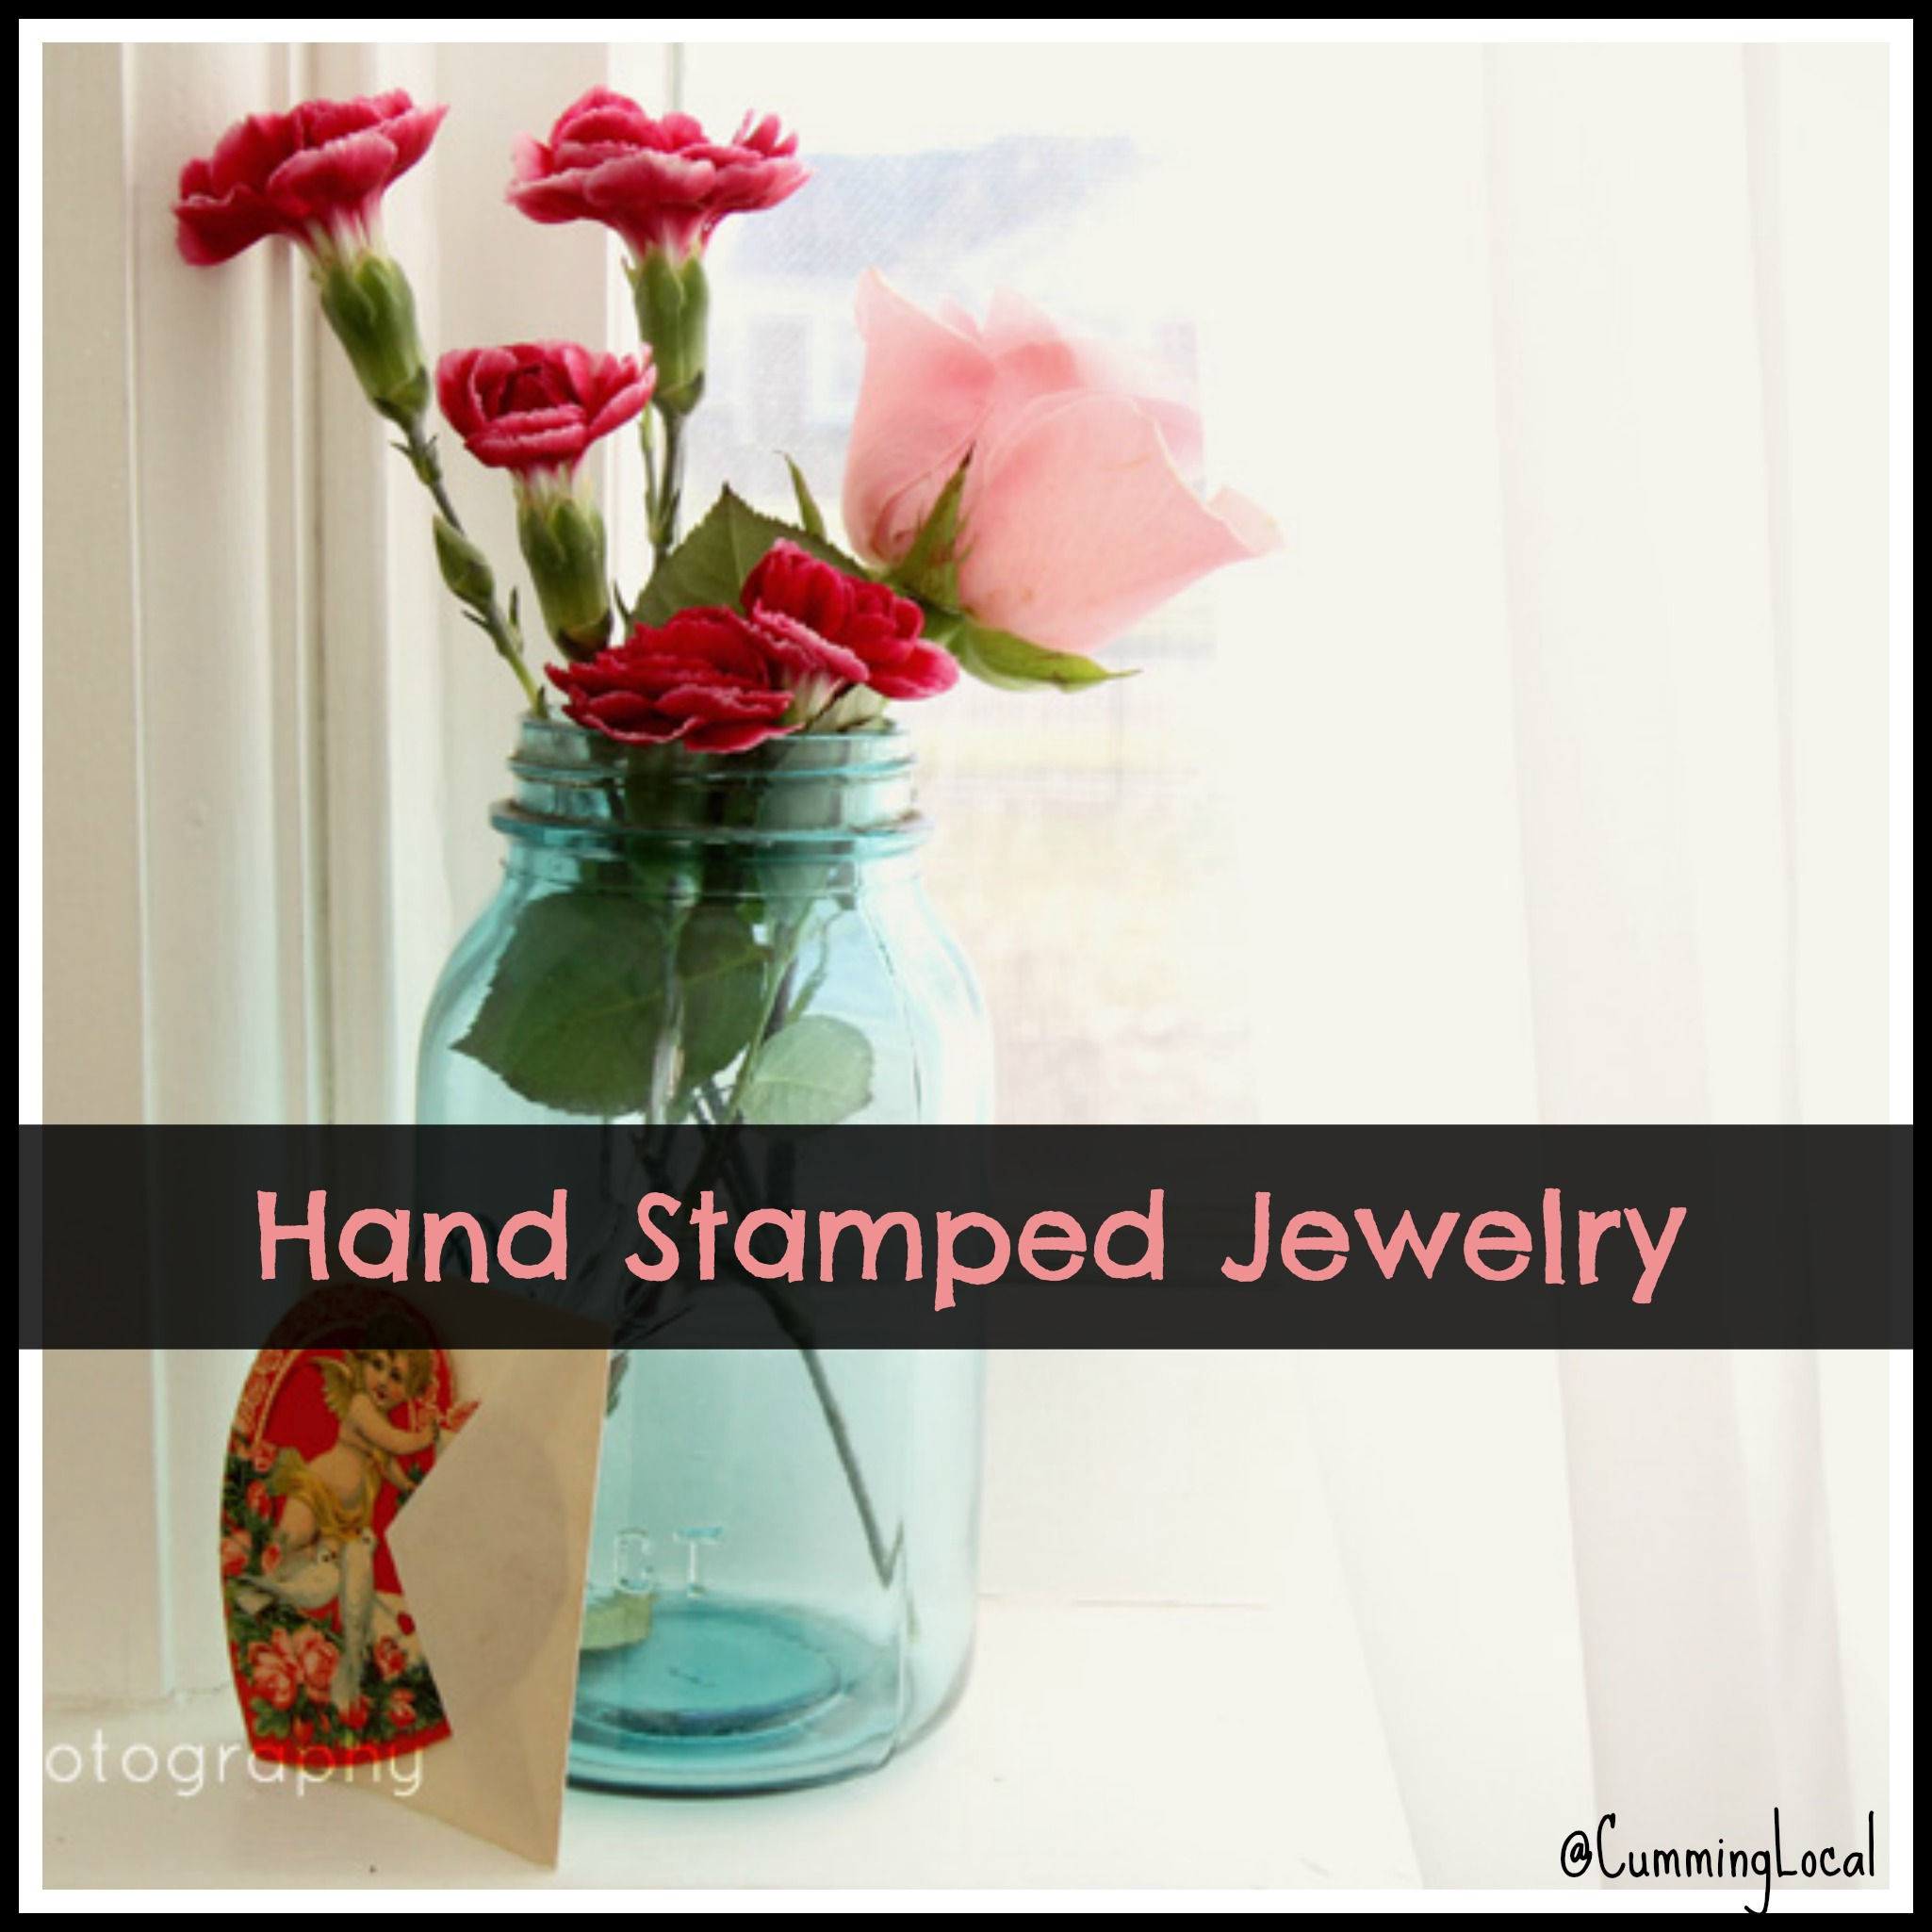 Best Places for Hand Stamped Jewelry